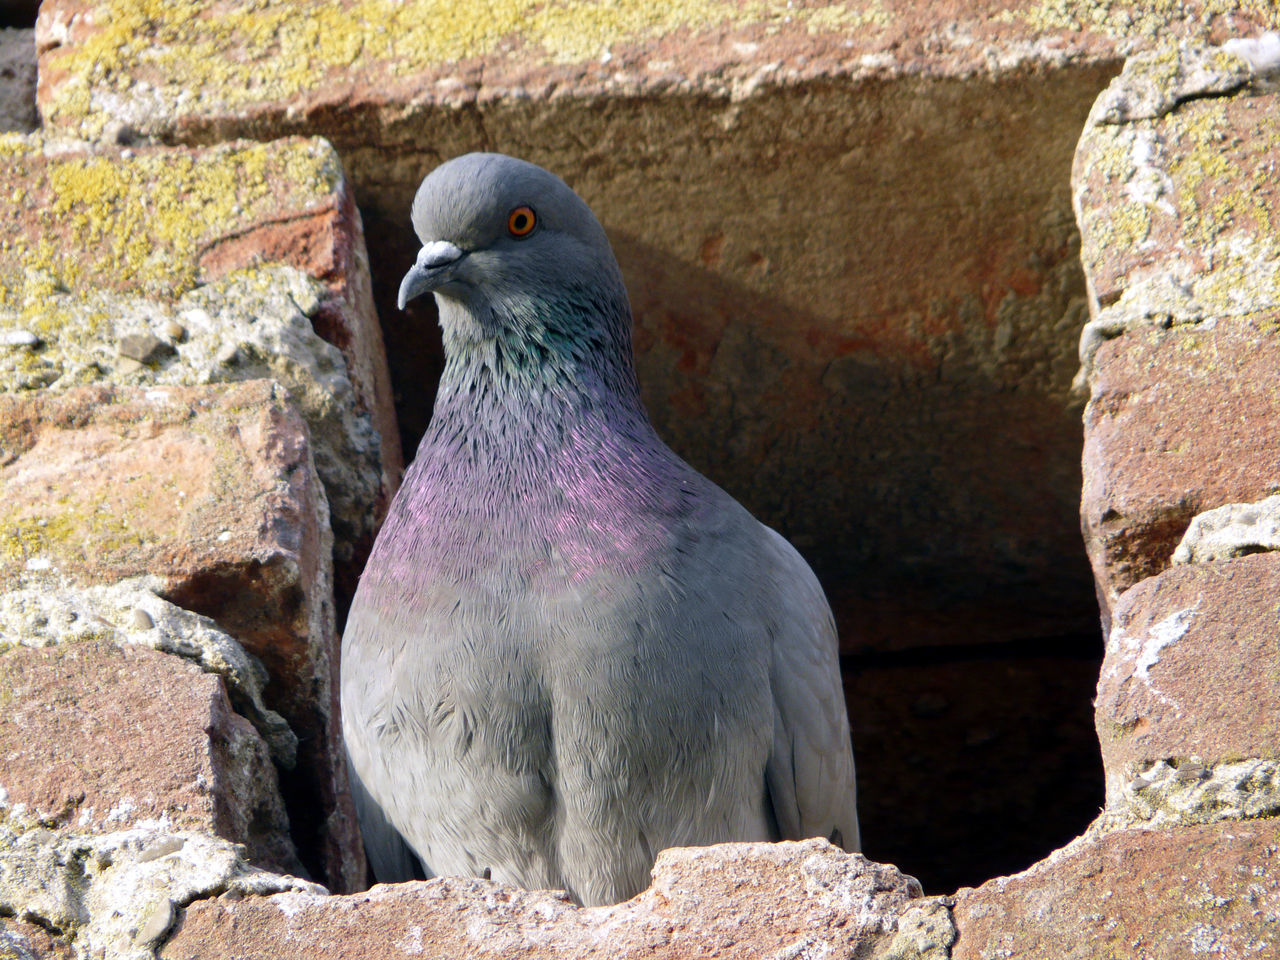 bird, rock - object, animal themes, animals in the wild, one animal, wildlife, rock, nature, day, outdoors, perching, stone - object, close-up, stone, no people, stone wall, full length, rock formation, pigeon, beauty in nature